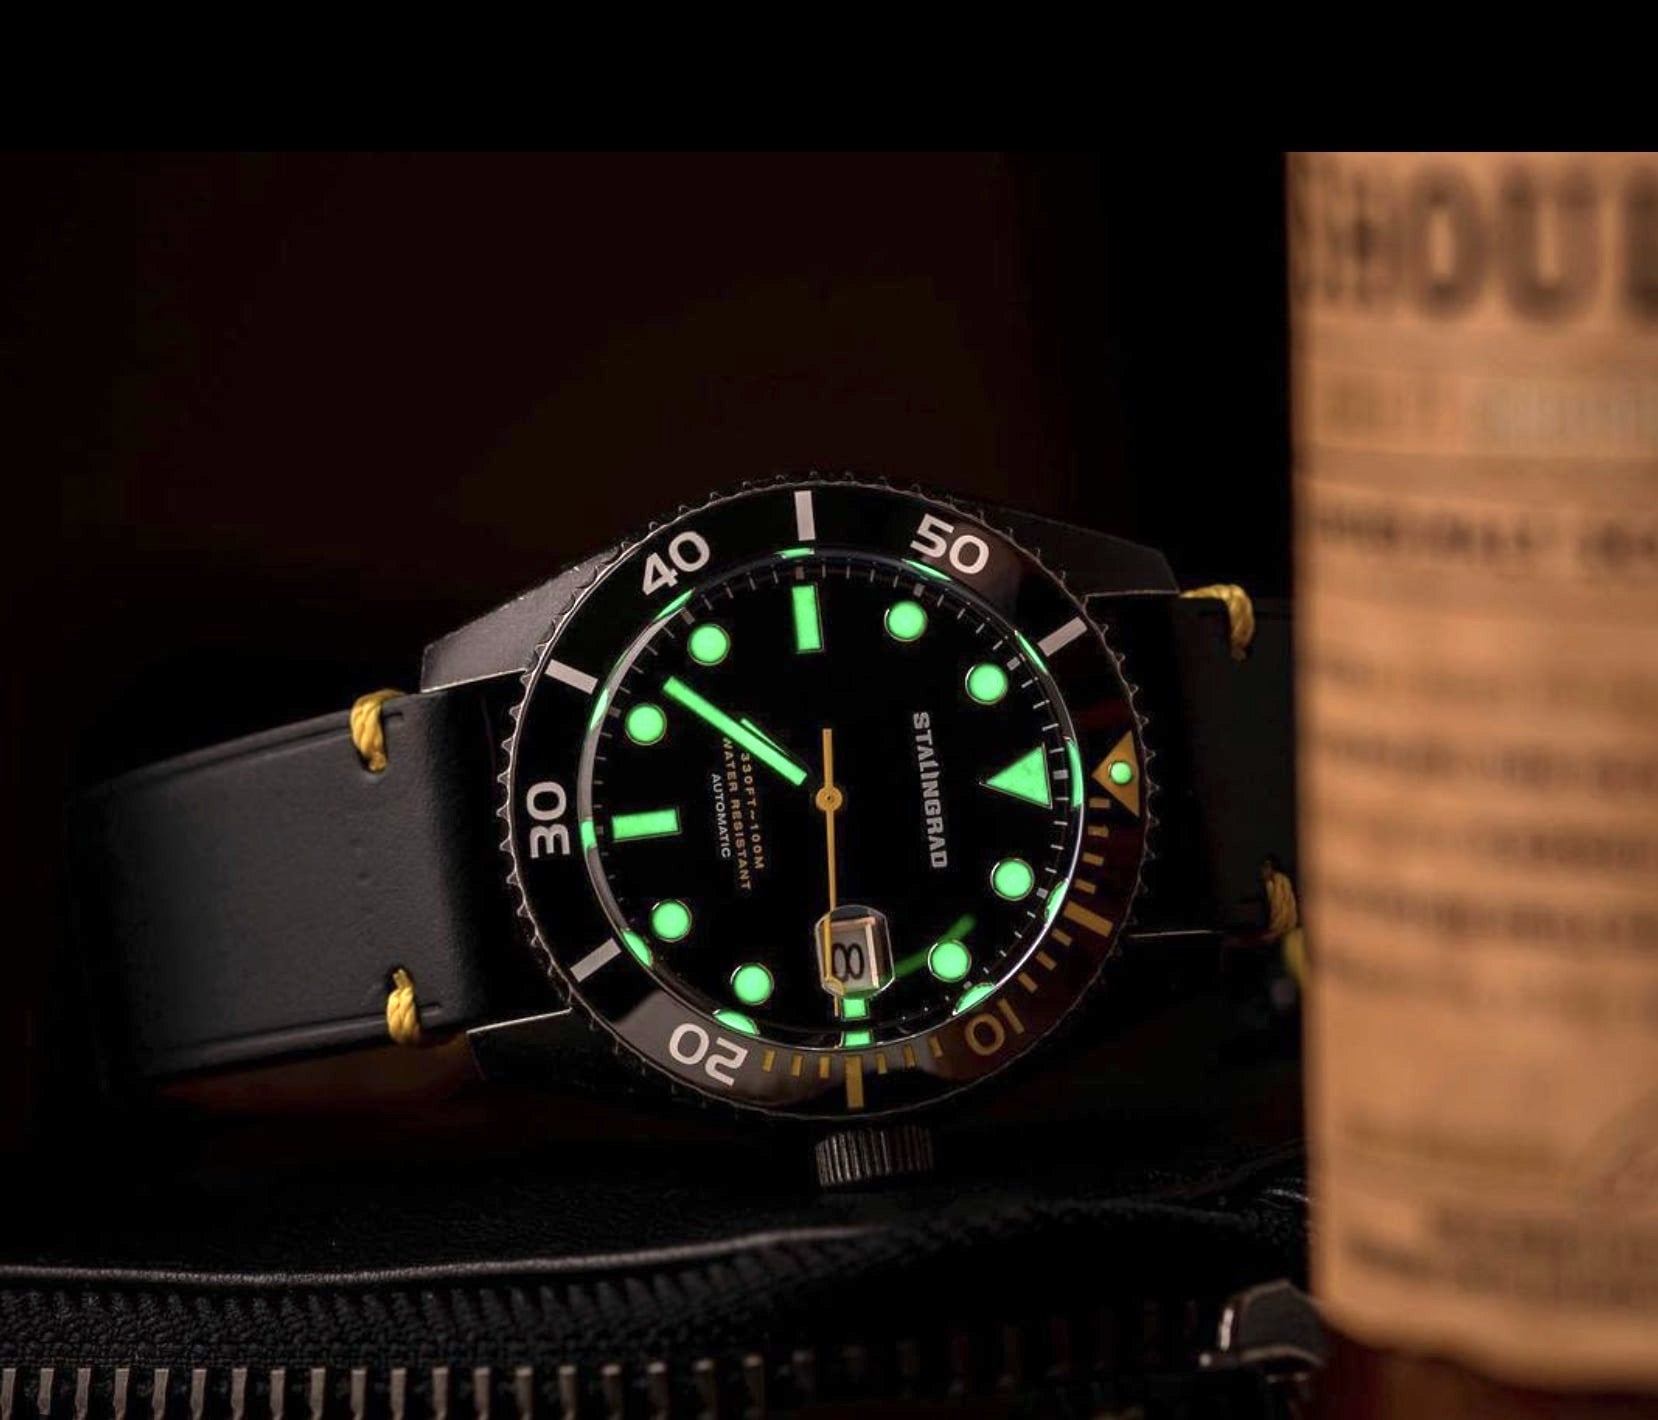 Stalingrad Volga Defender black dial and leather strap at night with Lume